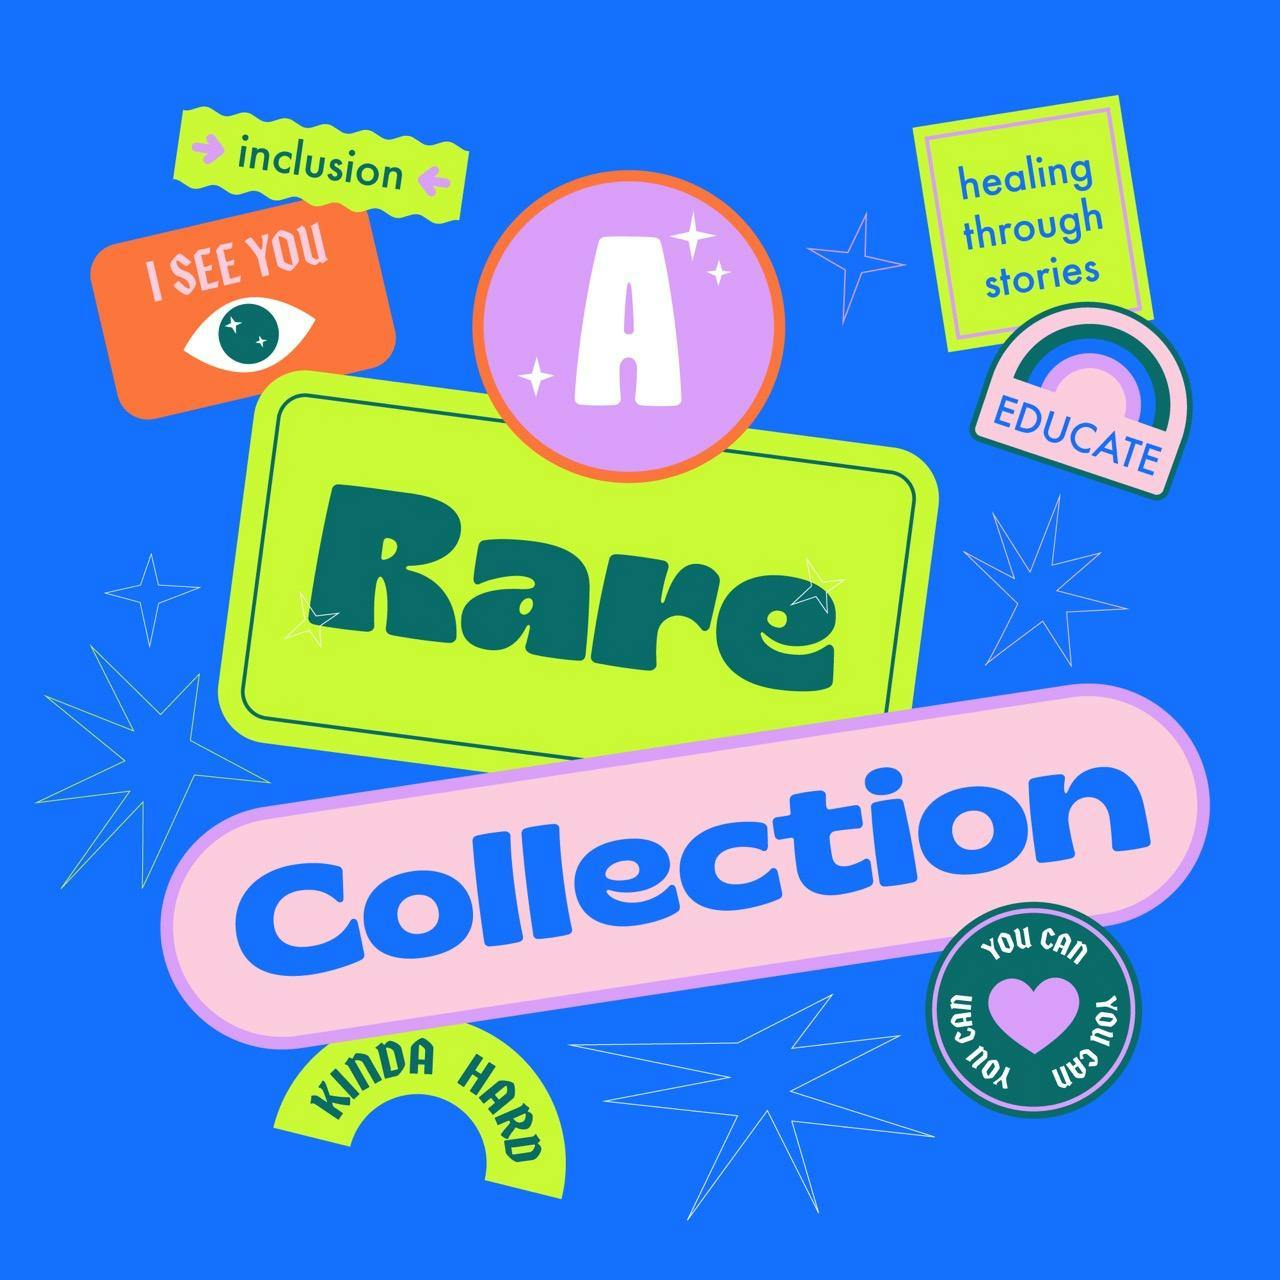 A Rare Collection – Easier Said Than Done